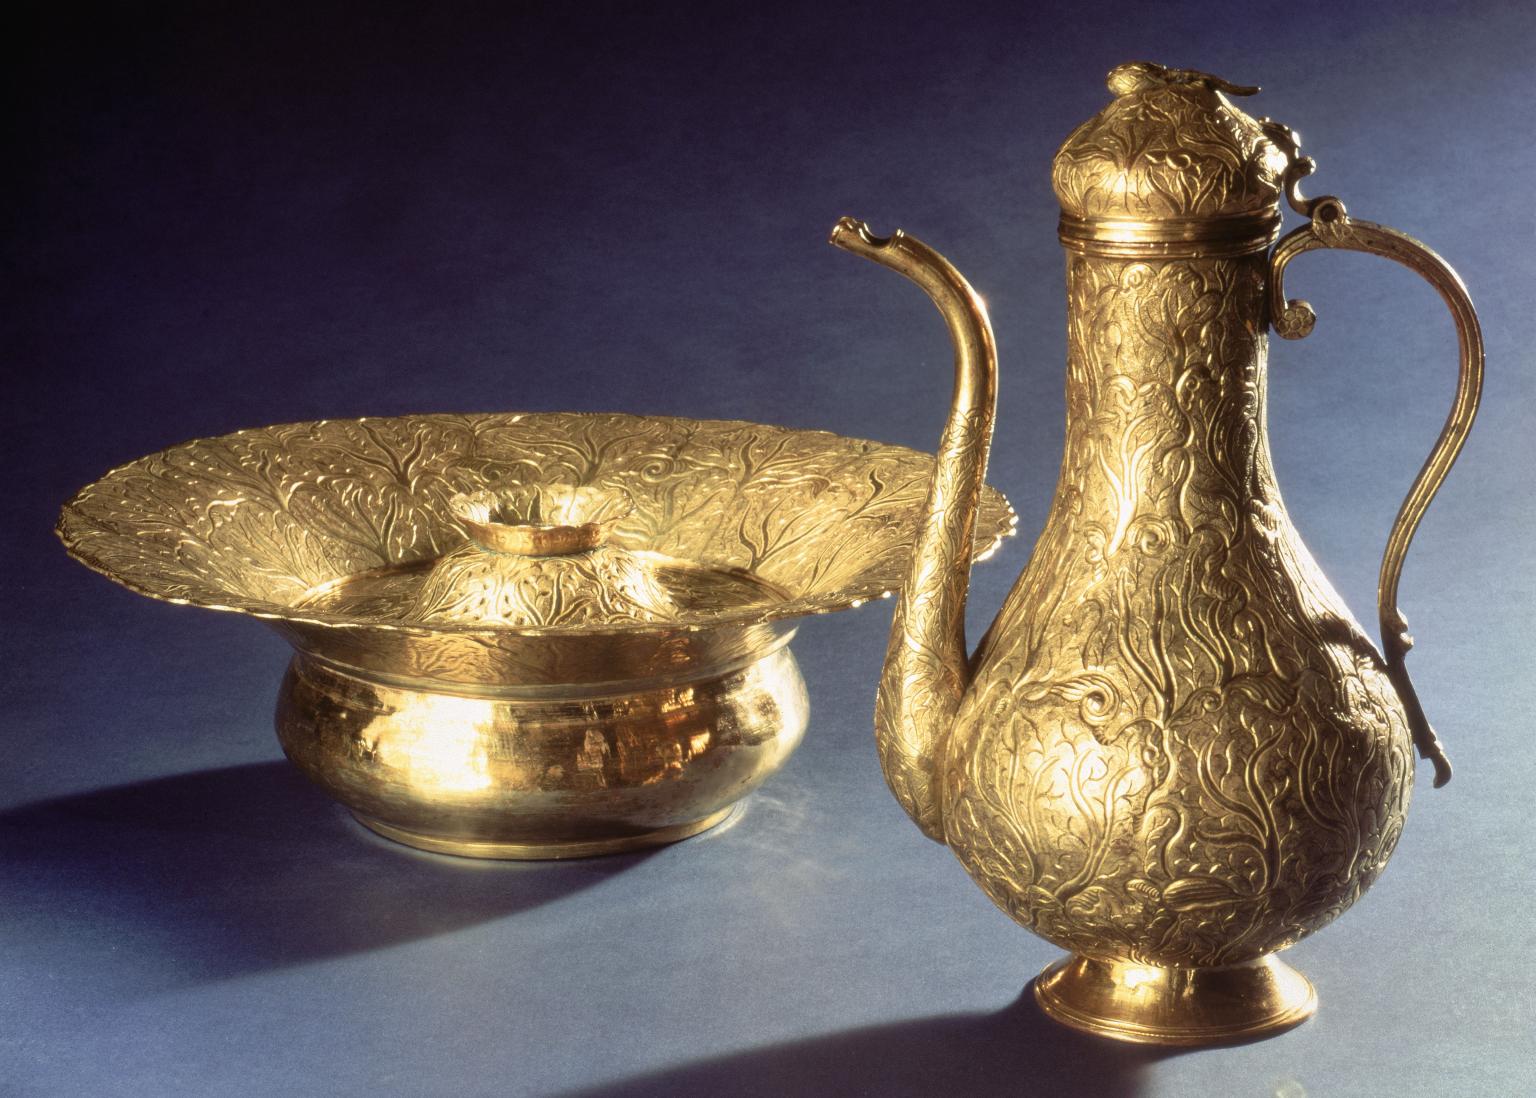 Gold ewer and basin. 